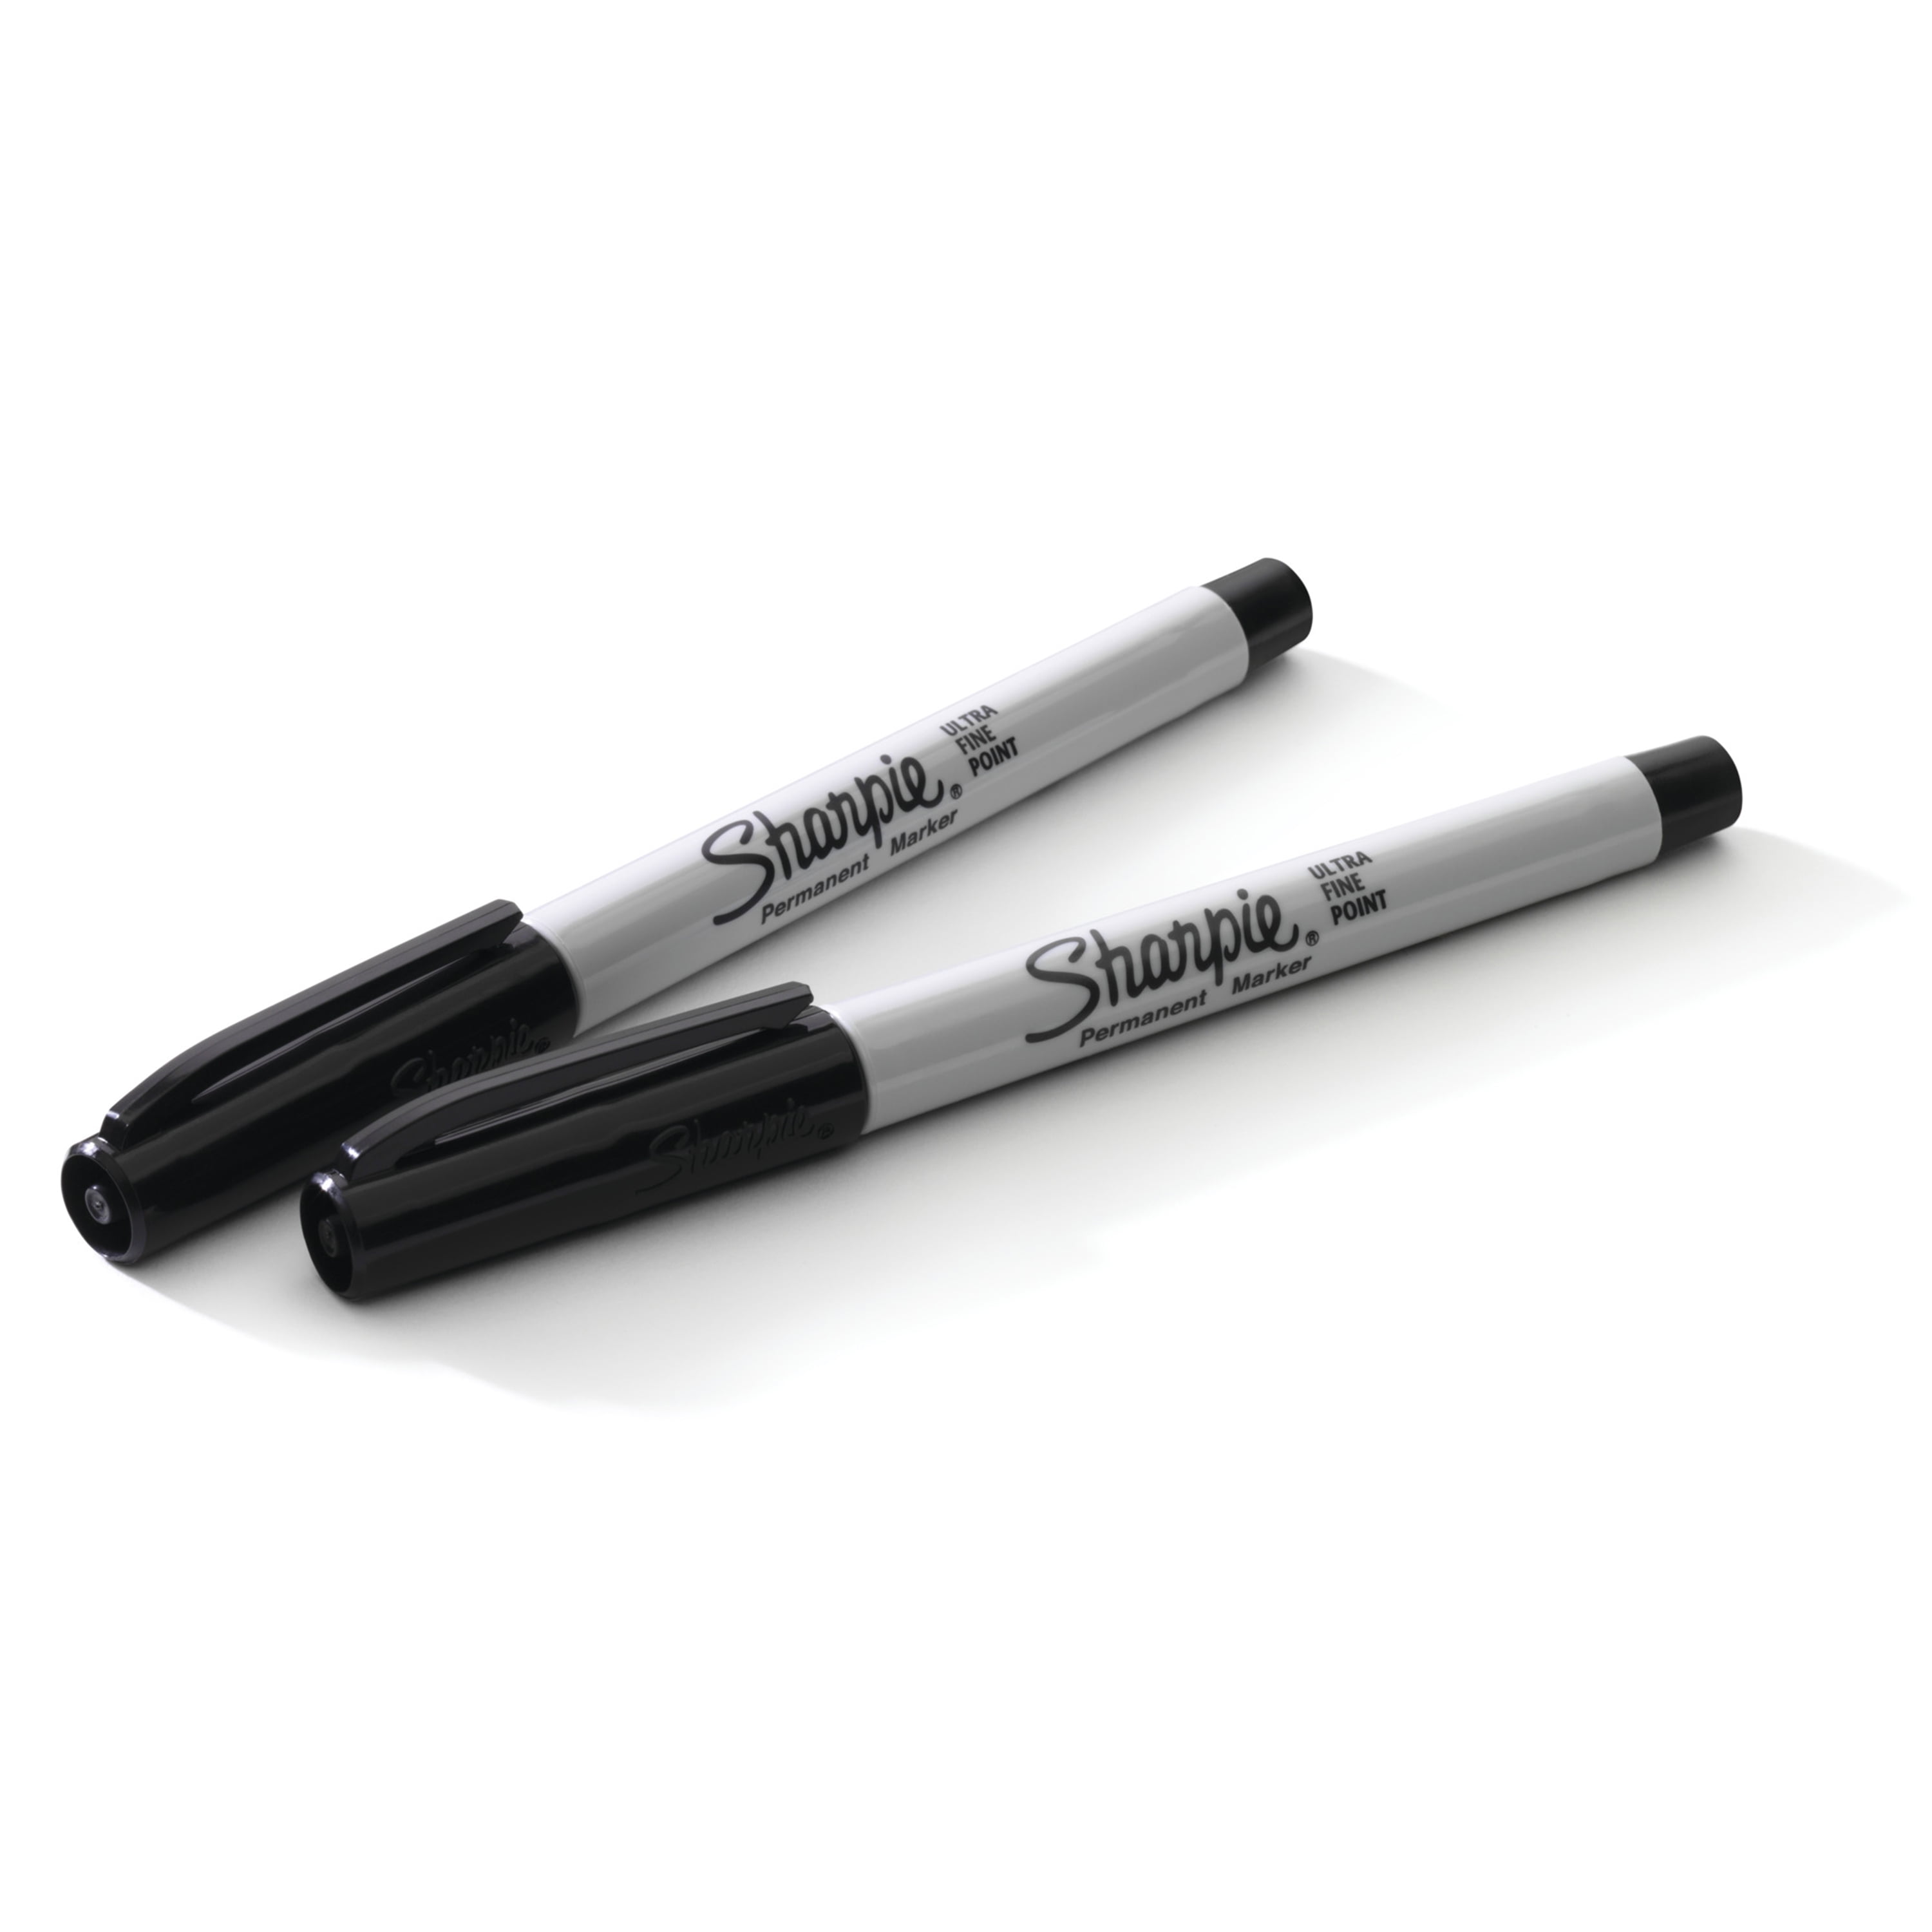 Sharpie Permanent Markers, Ultra Fine Point, Black, 5 Count 